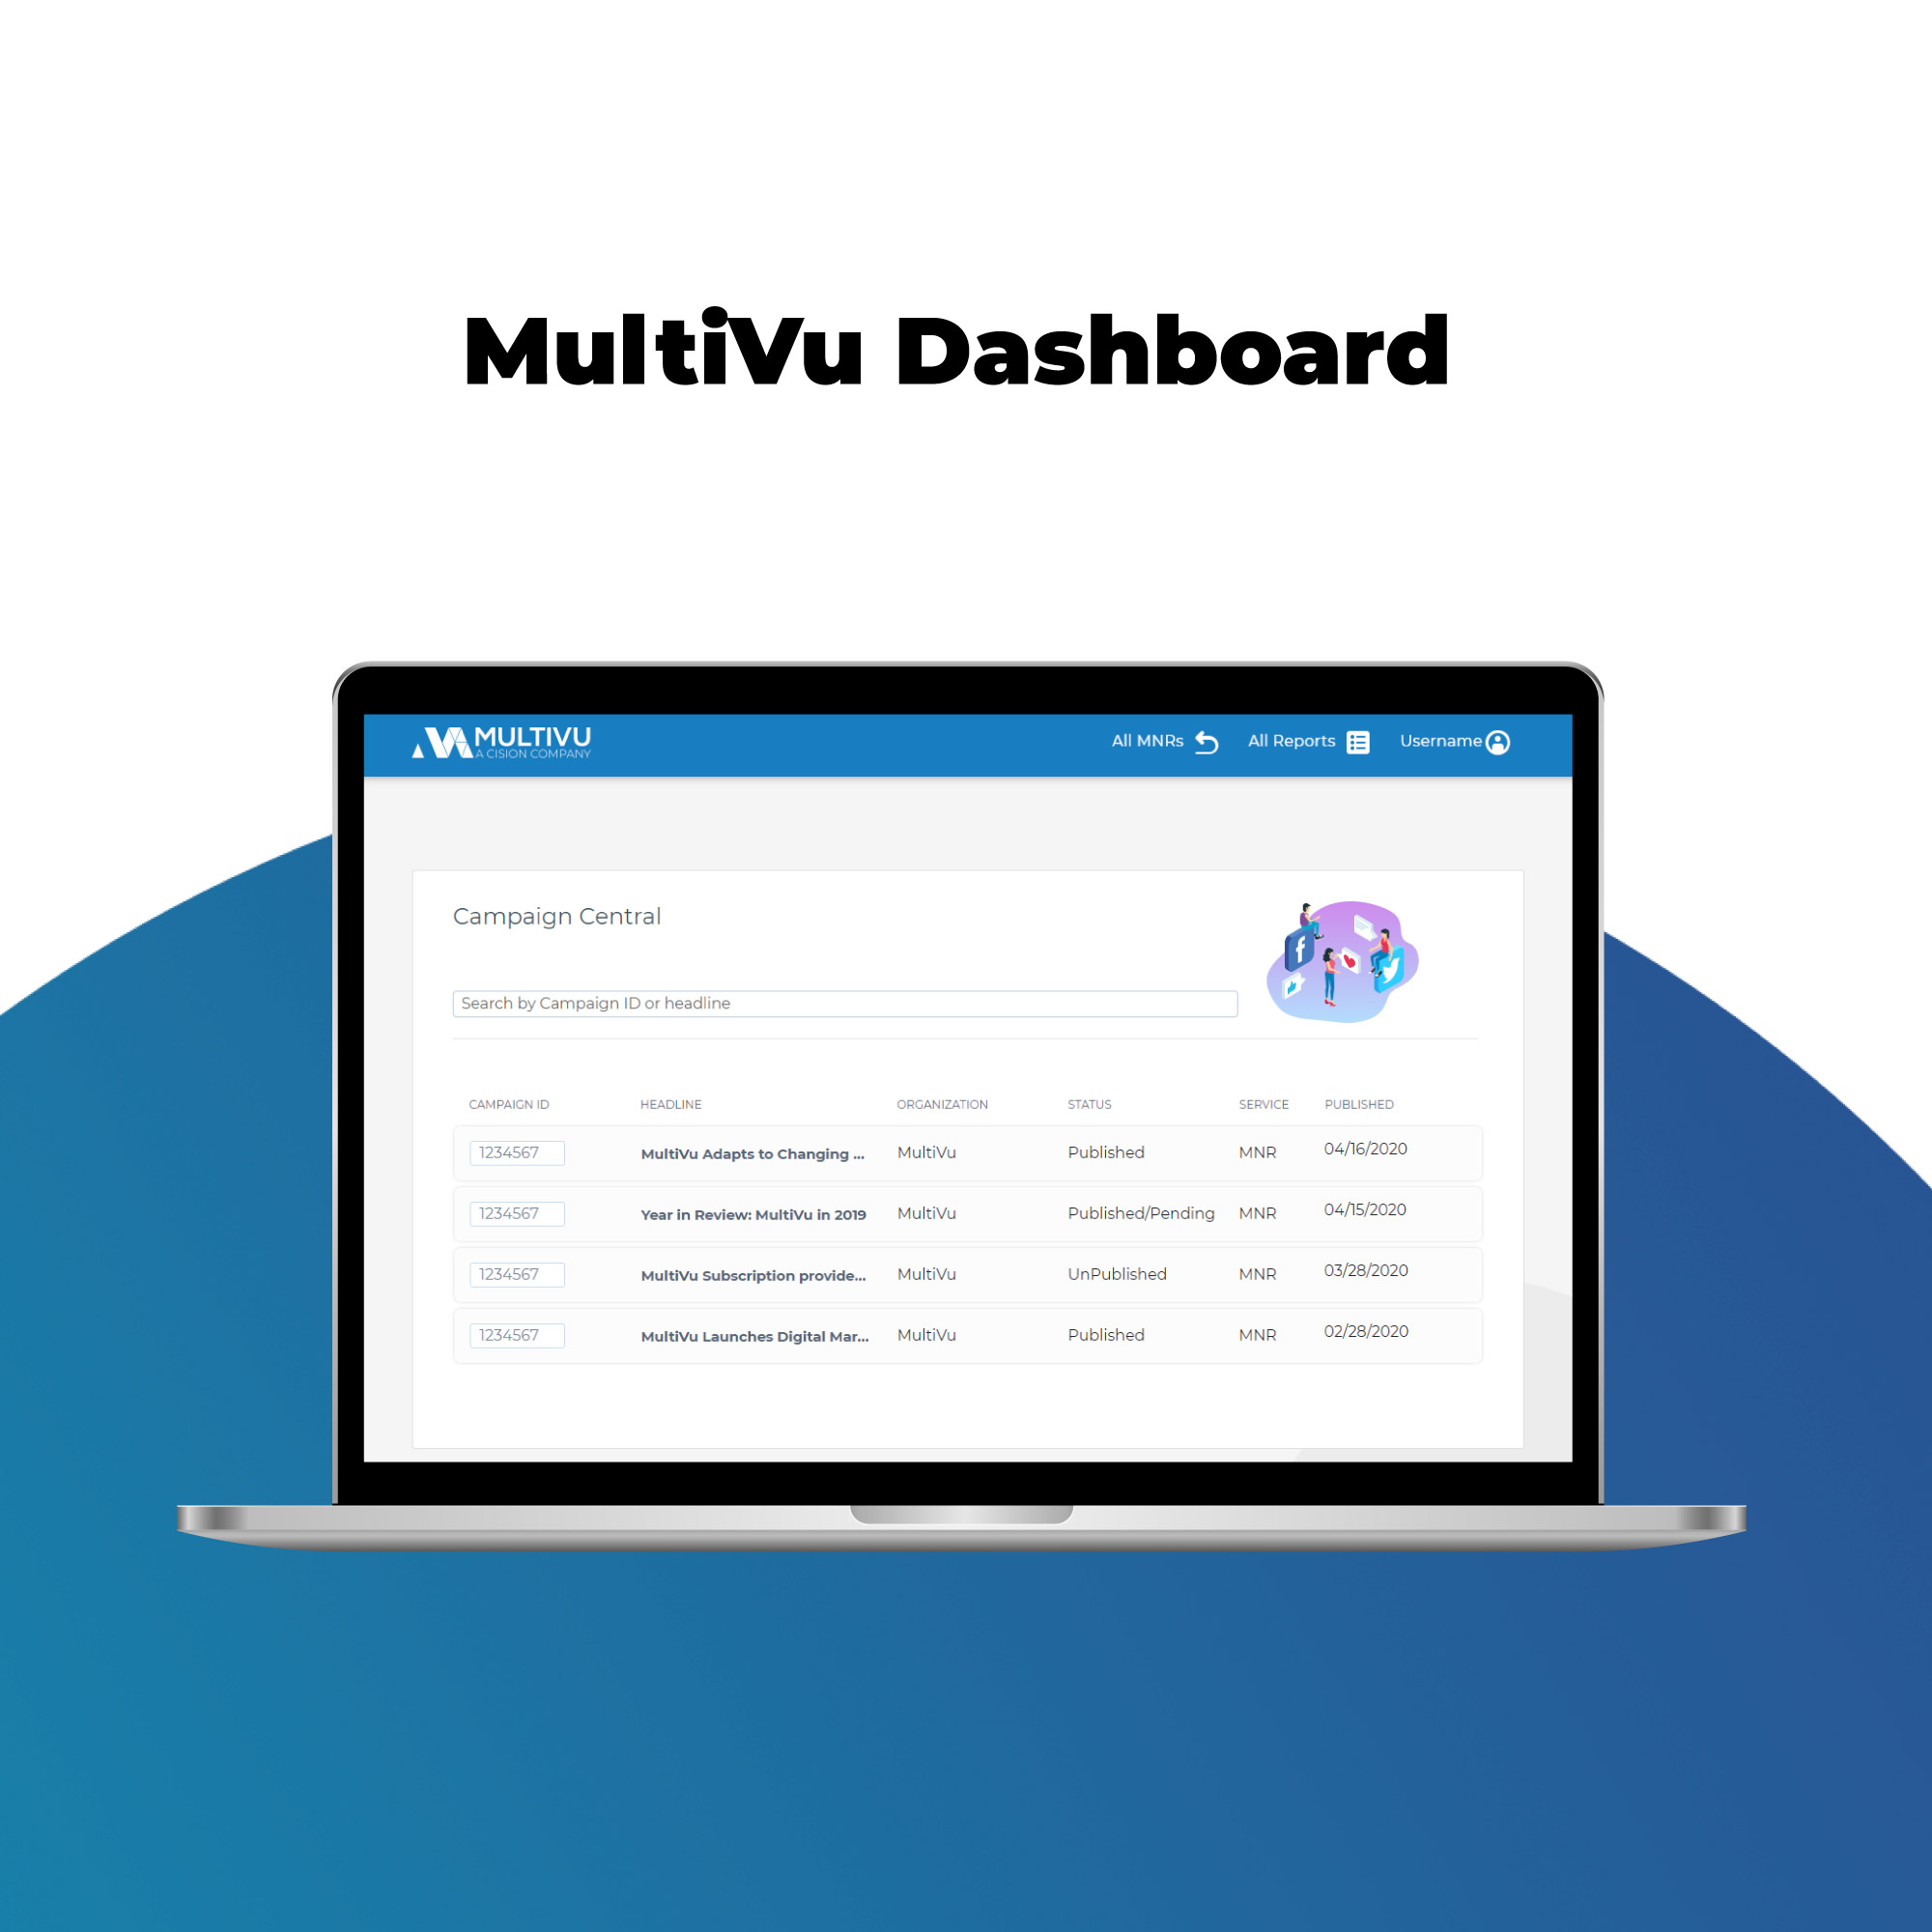 One platform for all of your MultiVu campaigns